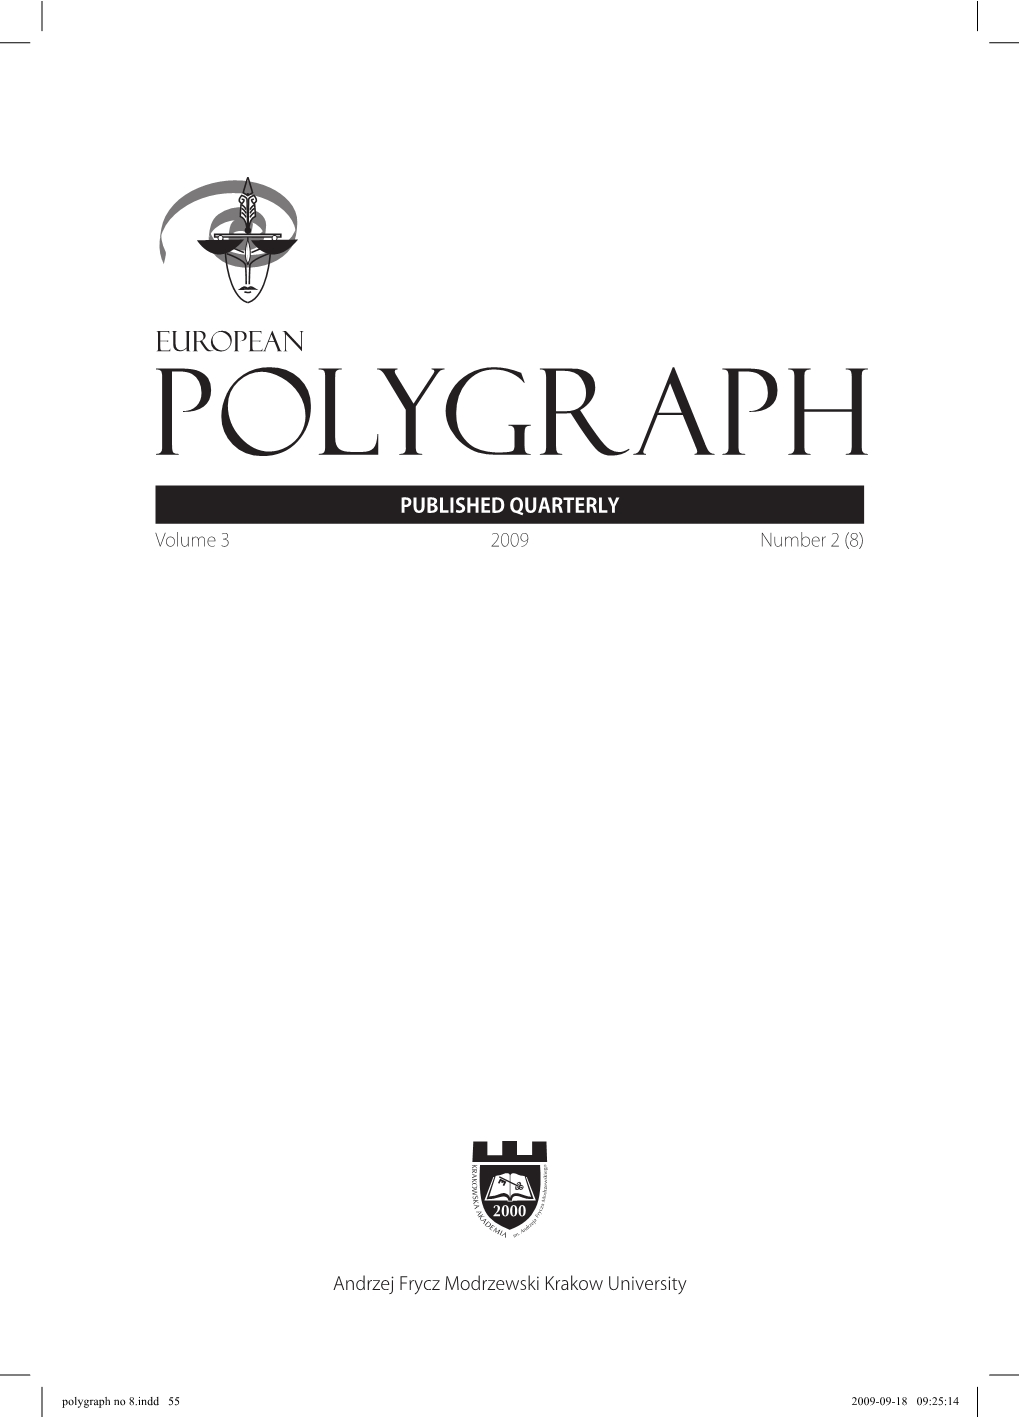 Daniel T. Wilcox (Ed.), “The Use of the Polygraph in Assessing, Treating and Supervising Sex Offenders. A Practitioner’s Guide”, Wiley–Blackwell, Chichester 2009, pp. 332 Cover Image